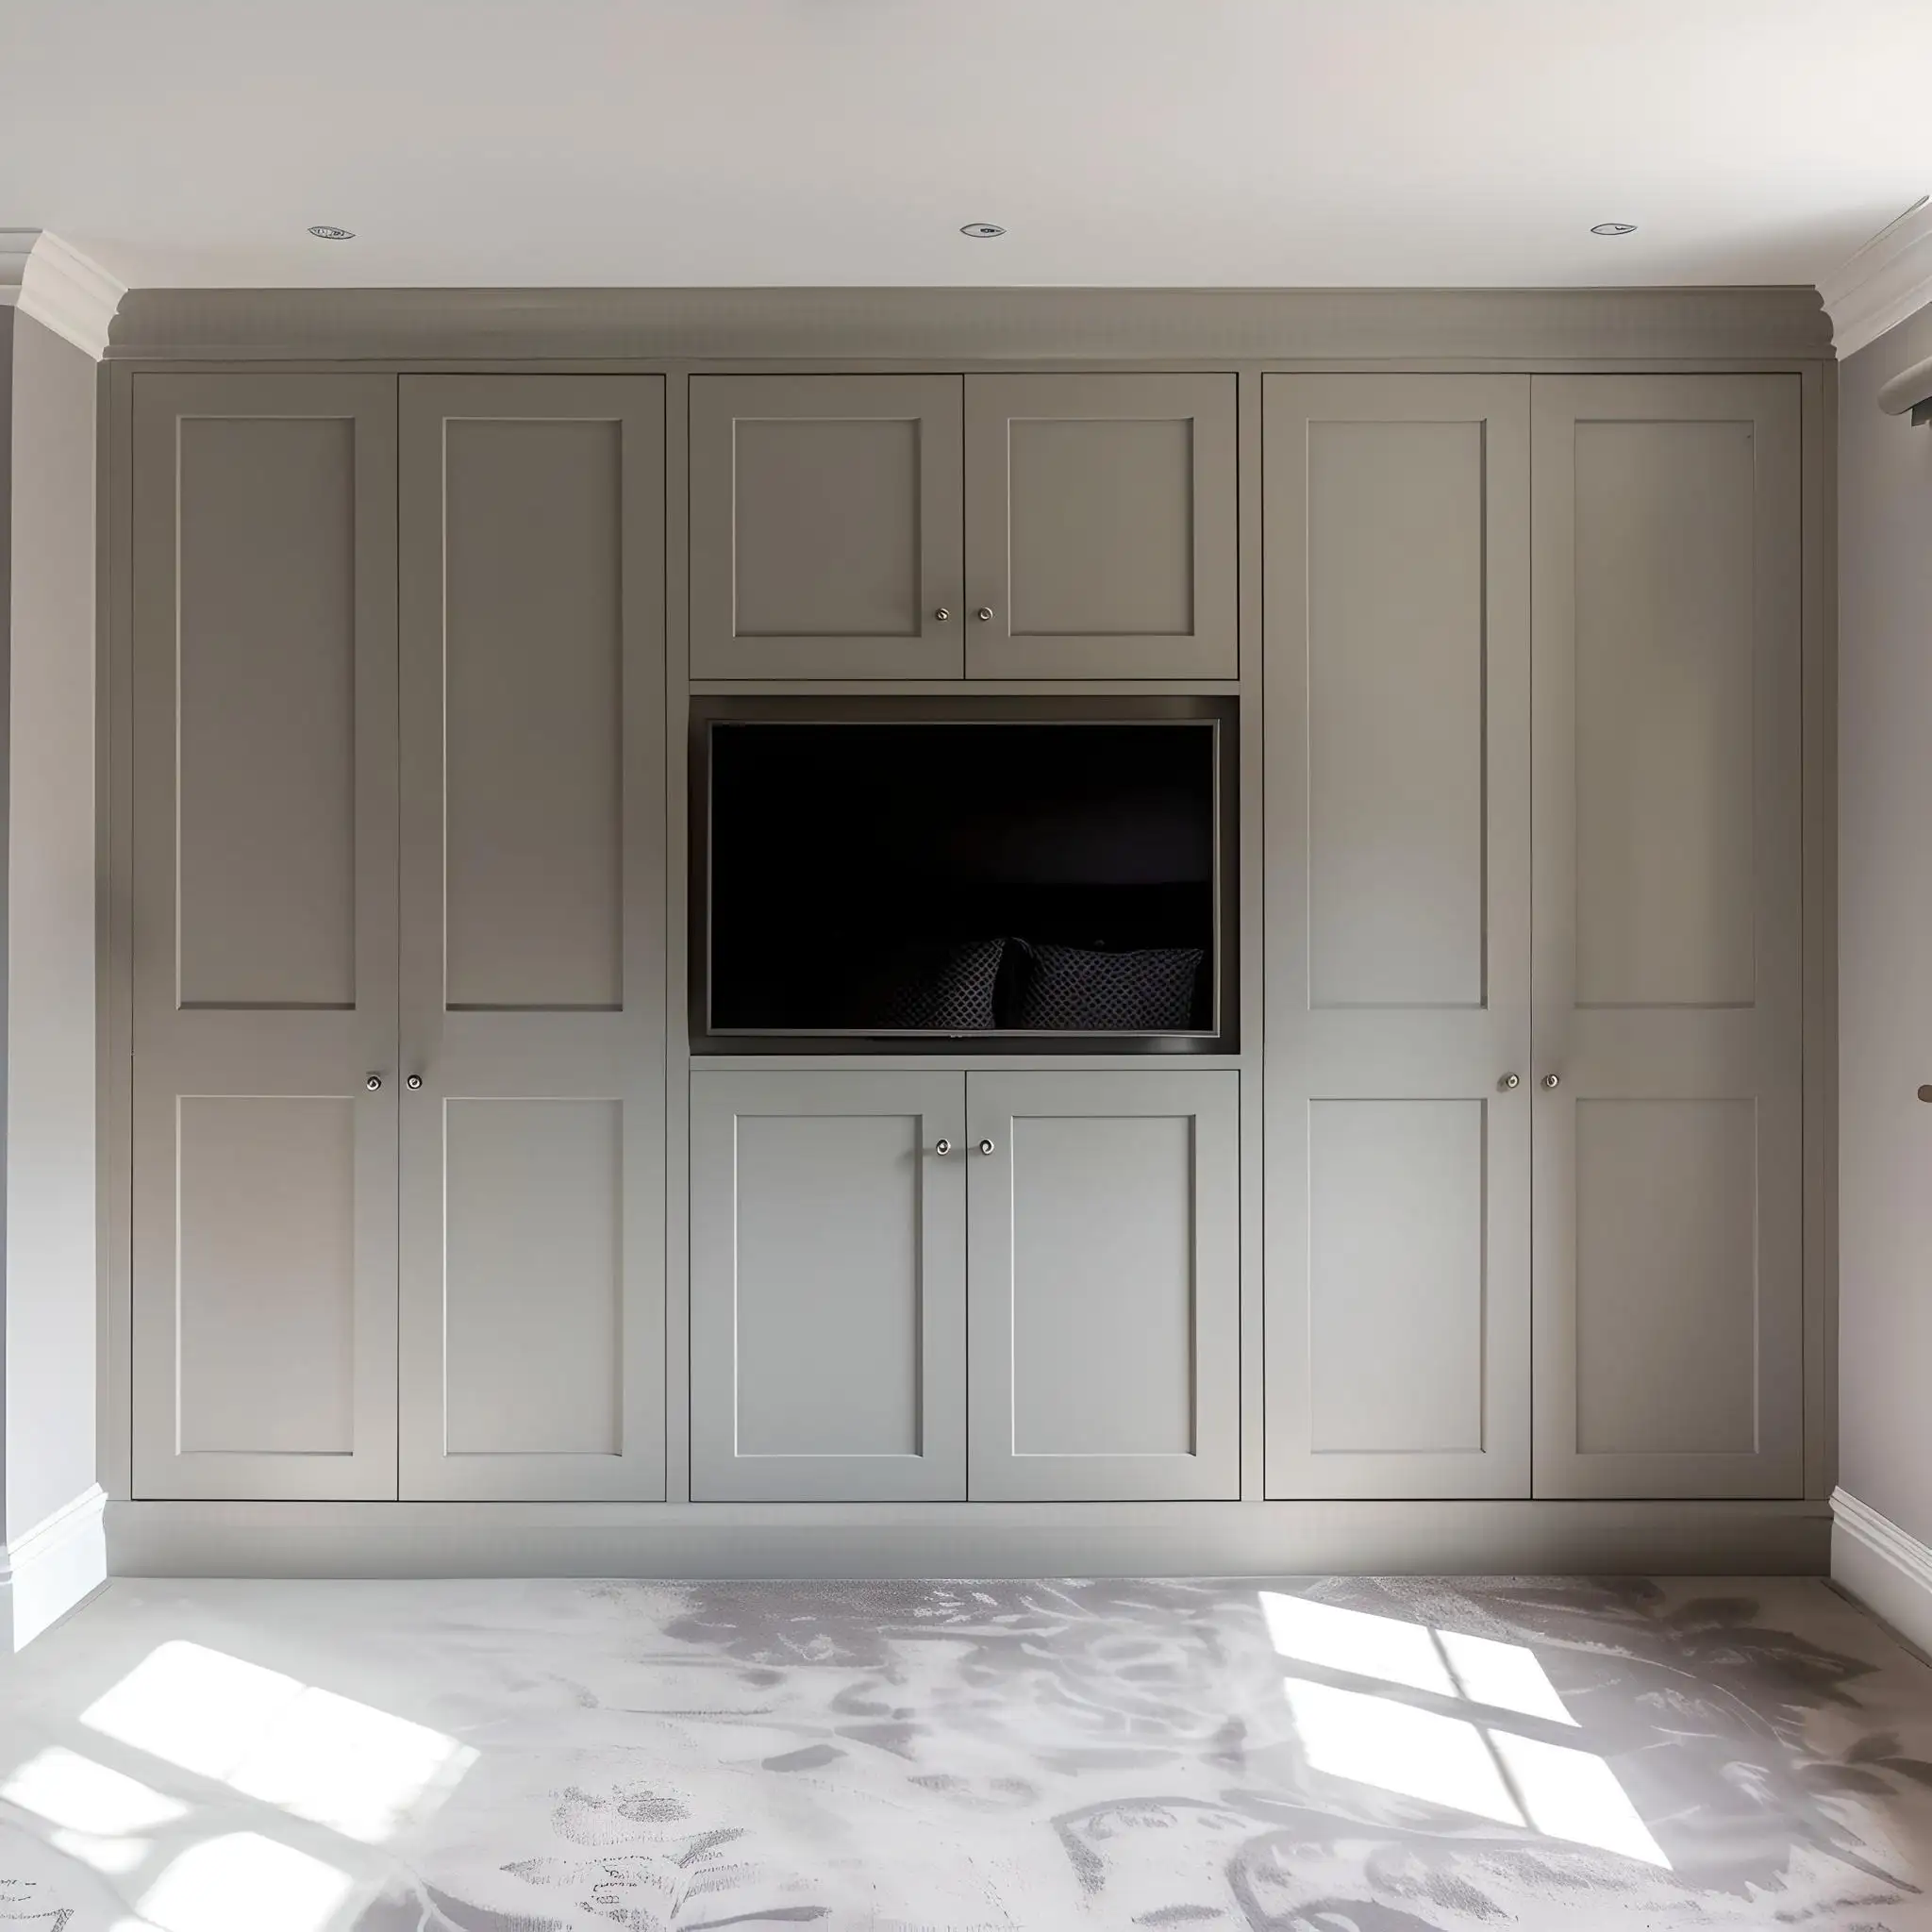 Fitted wardrobe with TV built-in to the centre hiding chimney breast